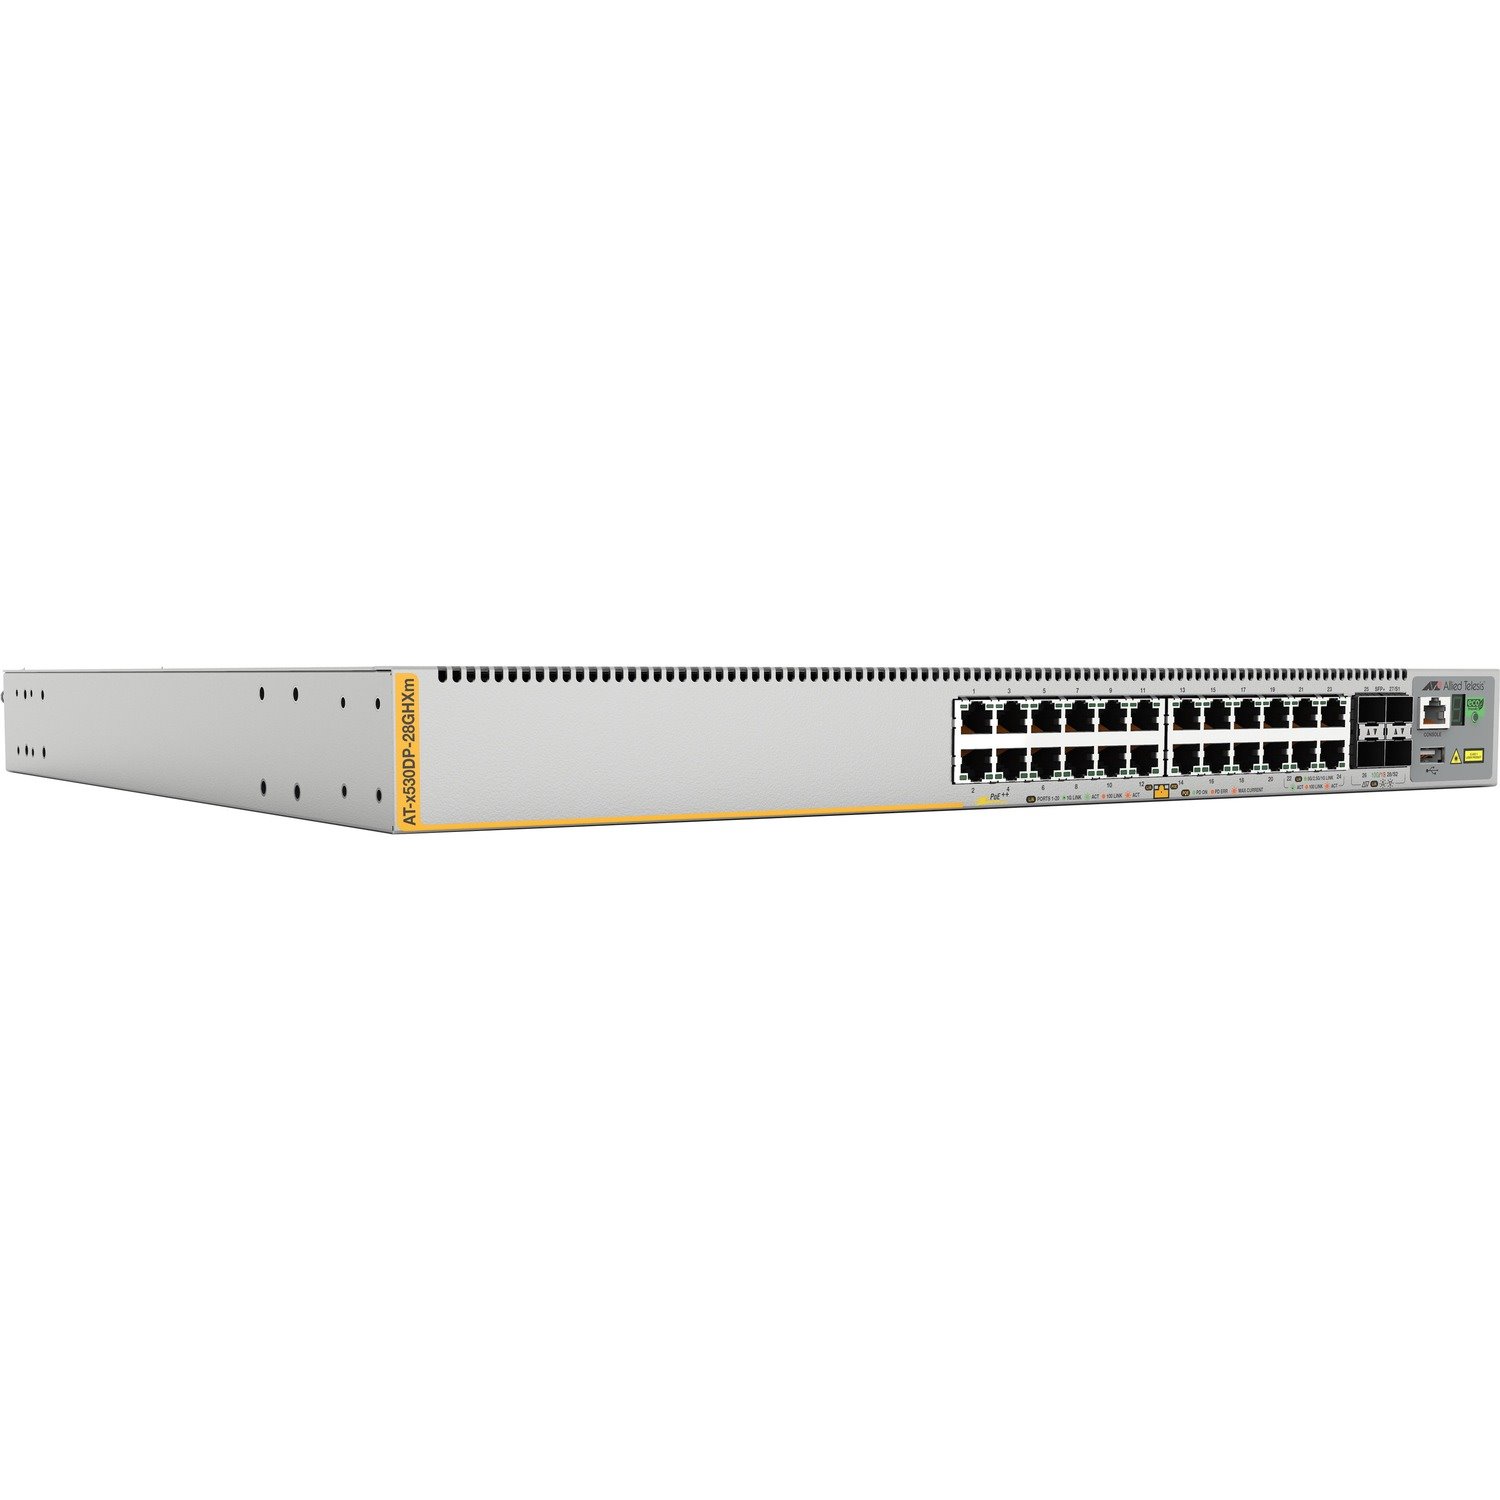 Allied Telesis x530 x530DP-28GHXm 24 Ports Manageable Layer 3 Switch - Gigabit Ethernet, 5 Gigabit Ethernet, 10 Gigabit Ethernet - 10/100/1000Base-T, 10GBase-X, 5GBase-T